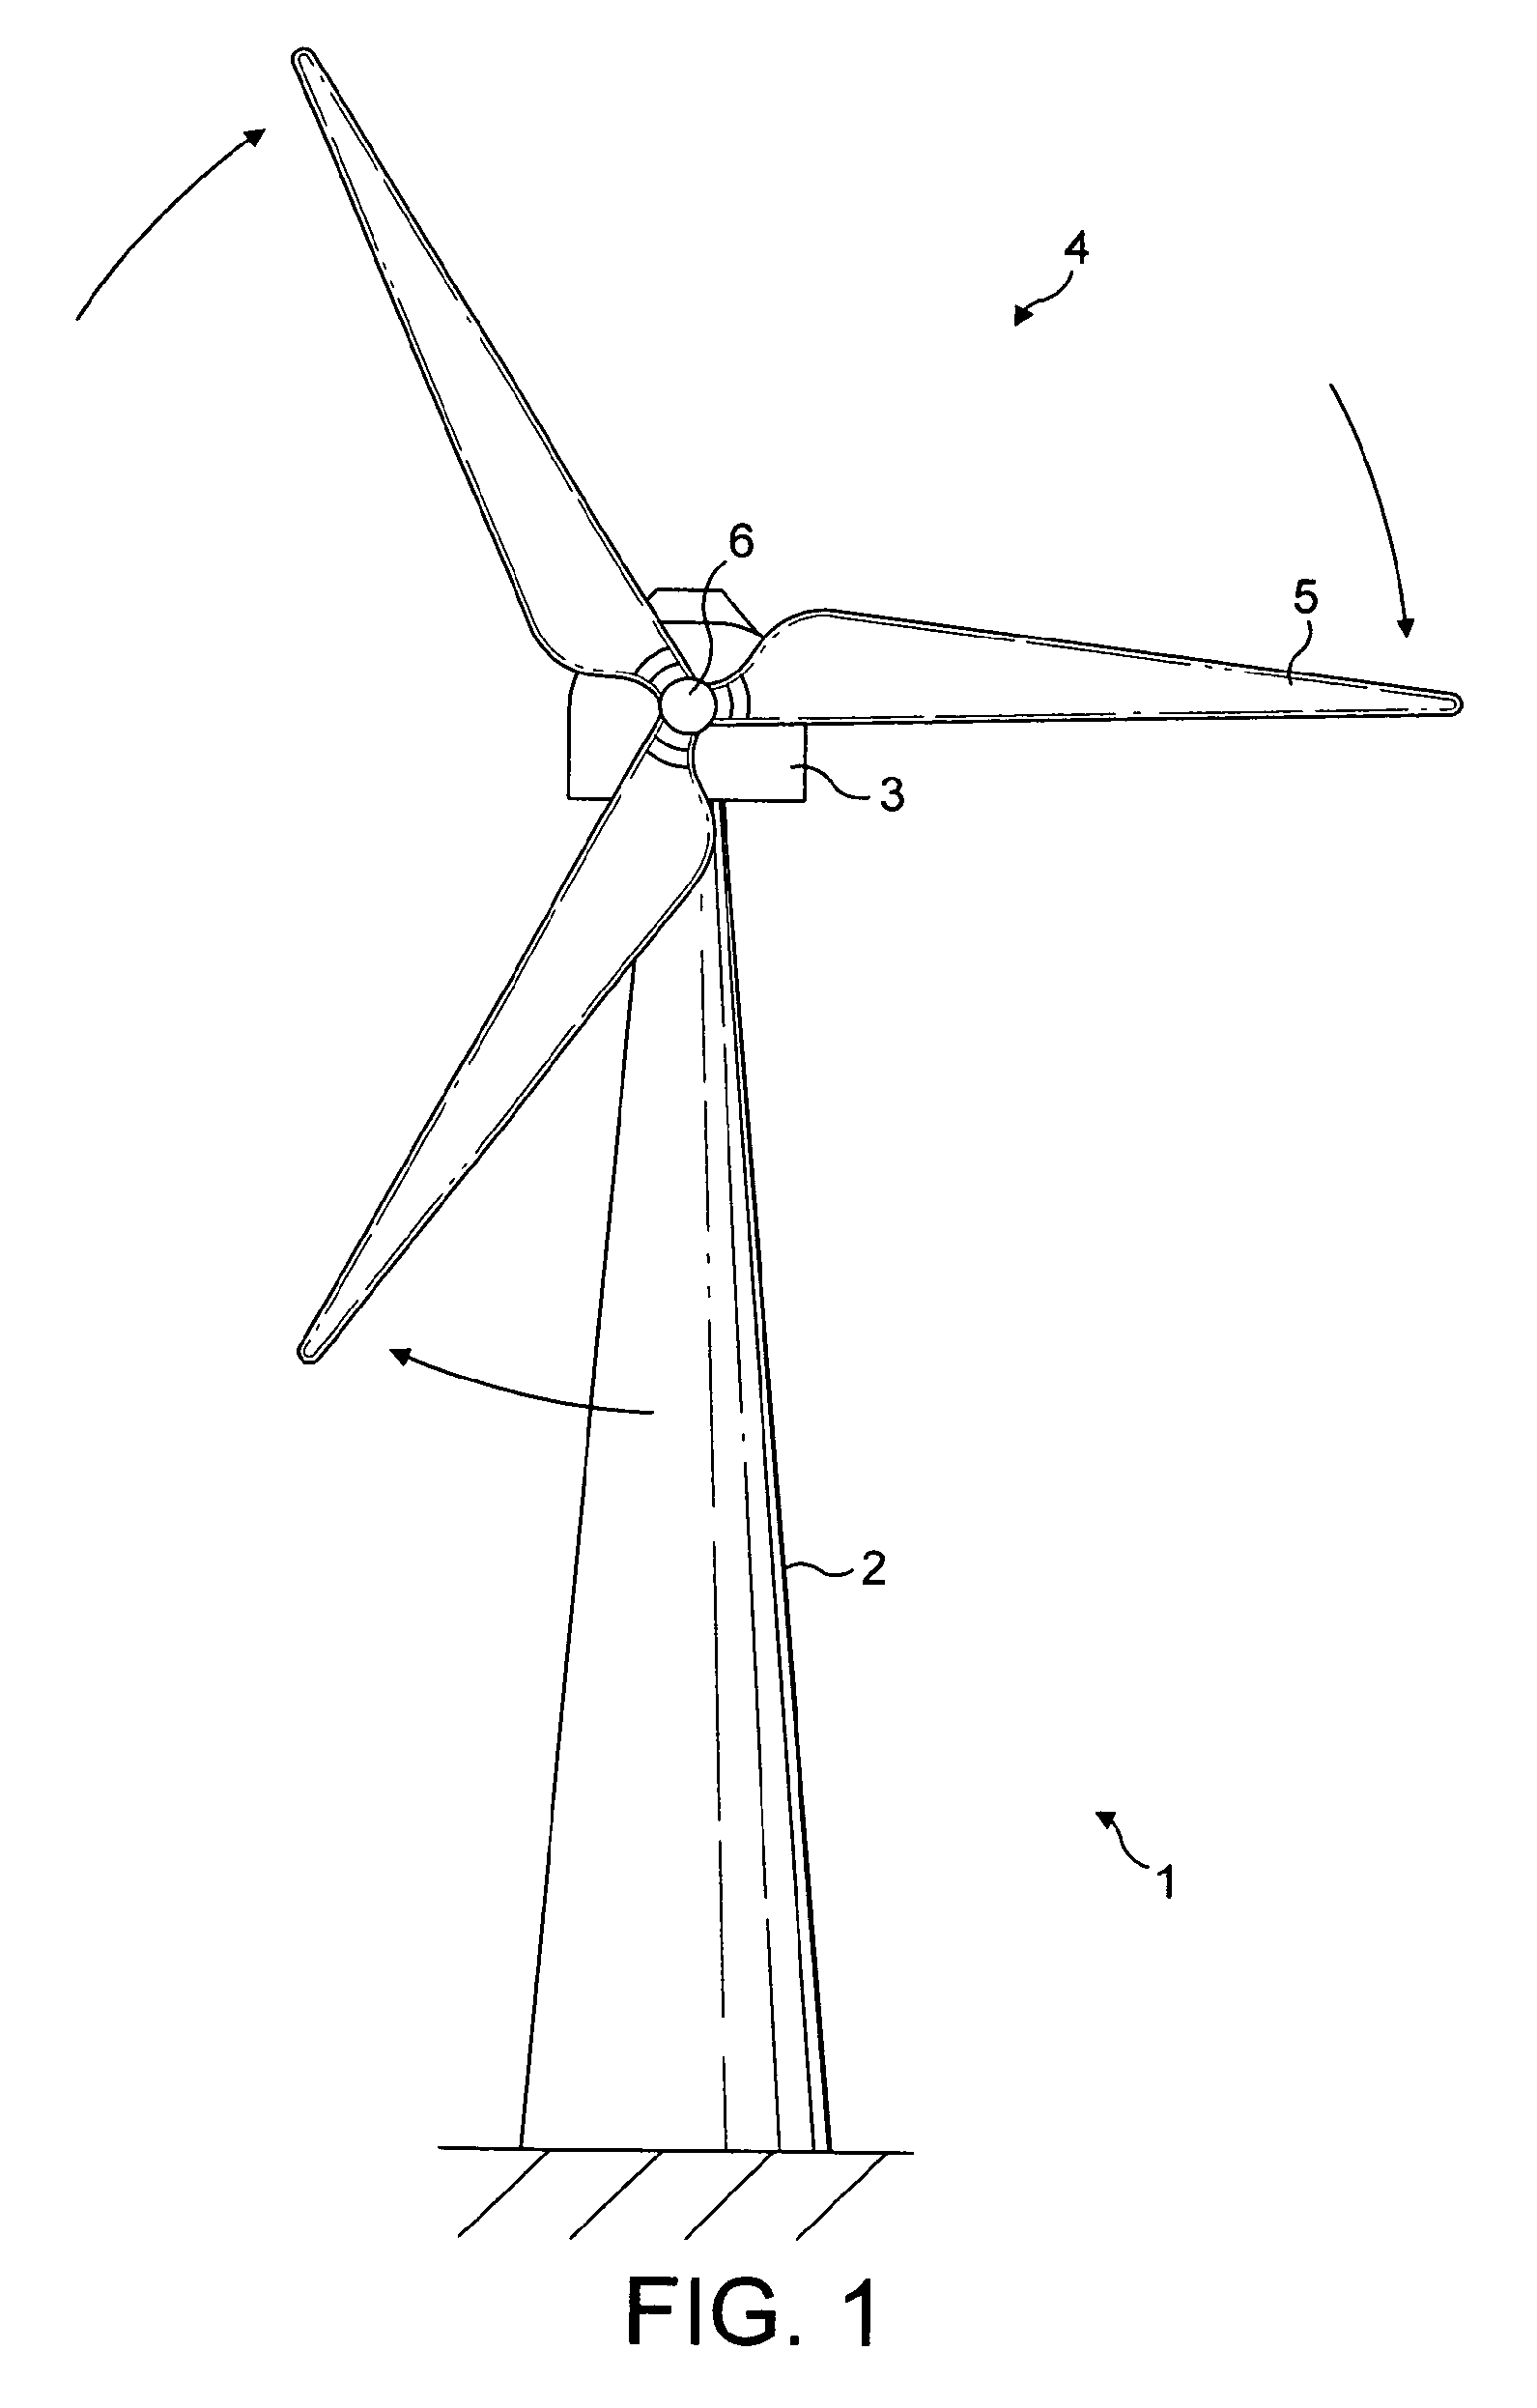 Anti-oscillation apparatus and technique for securing wind turbine blades against oscillations